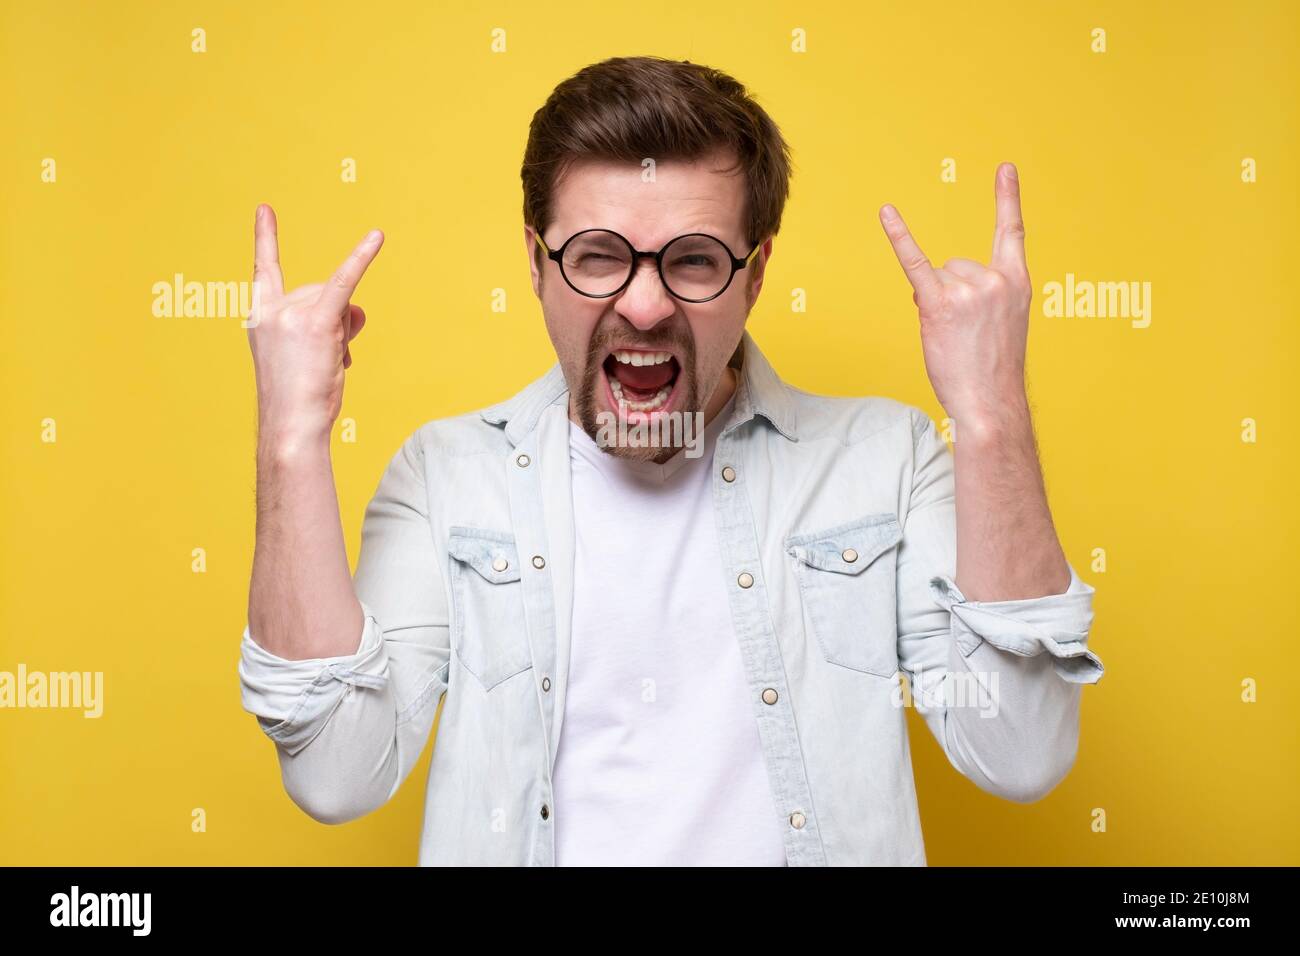 Caucasian man showing rock signs with both hands and shouting out loud, expressing overwhelmingness and joy. Studio shot on yellow wall. Stock Photo